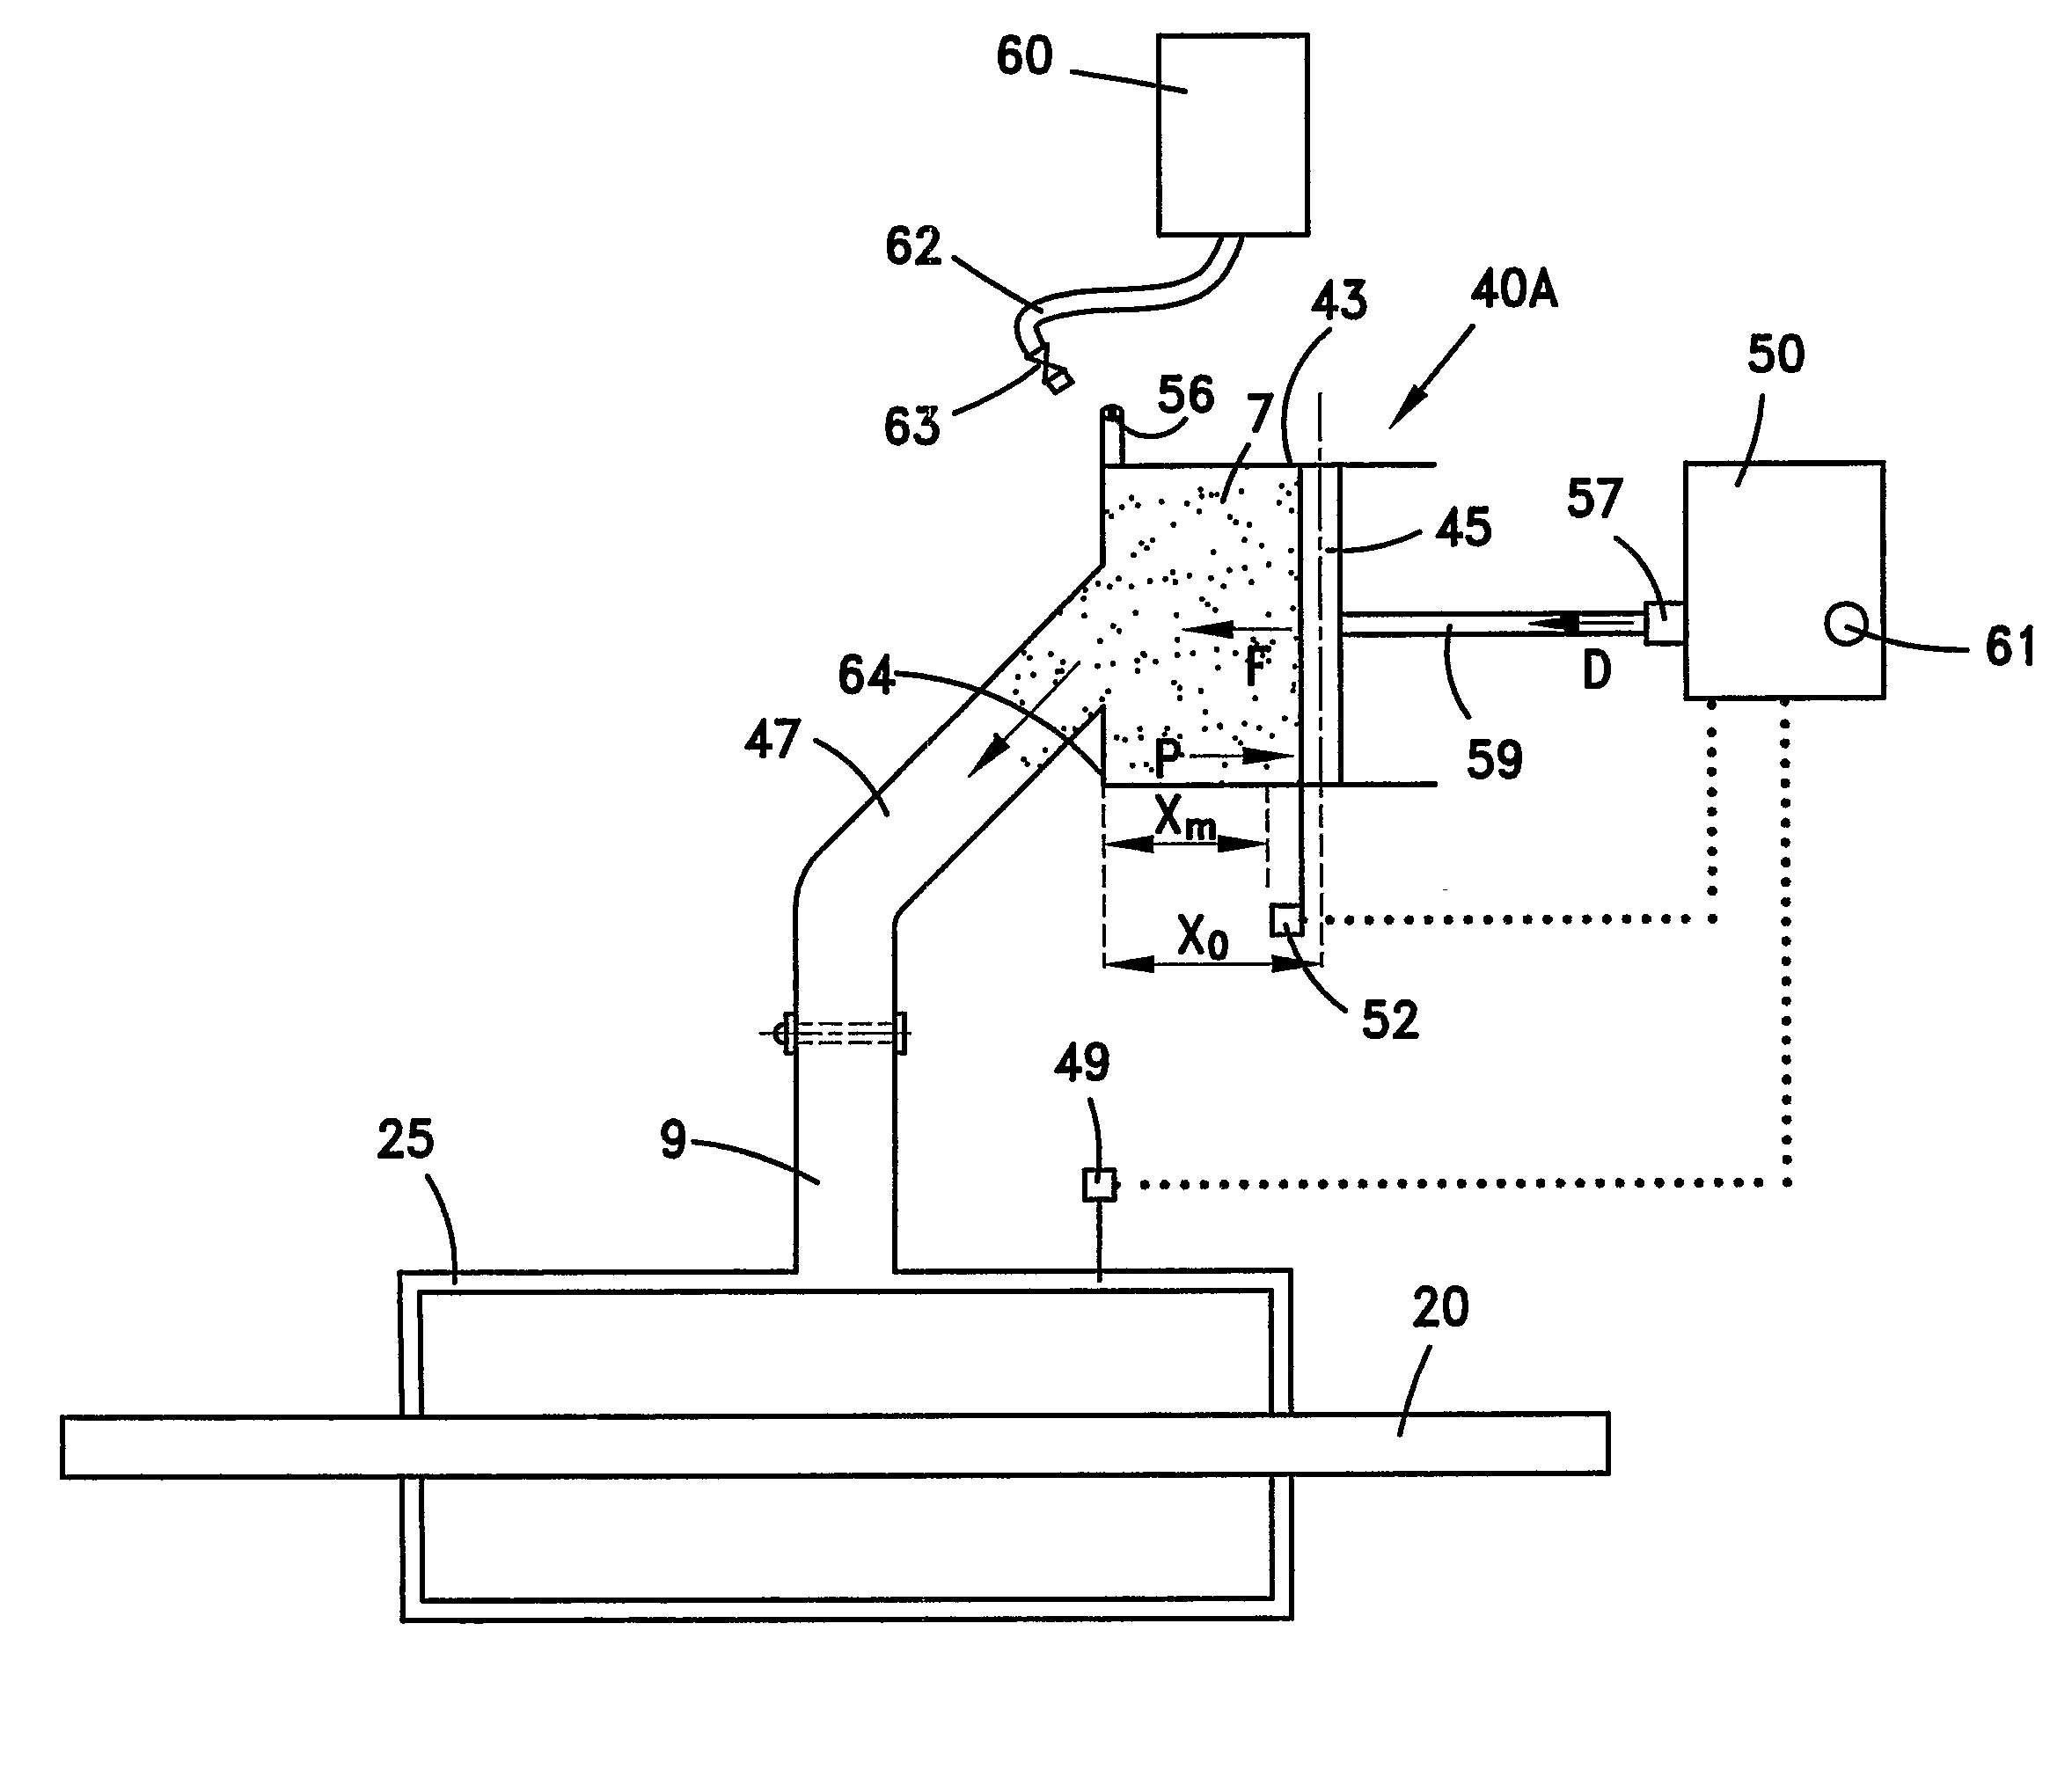 Apparatus for delivering sealant at a predetermined pressure to a stuffing box of a shaft